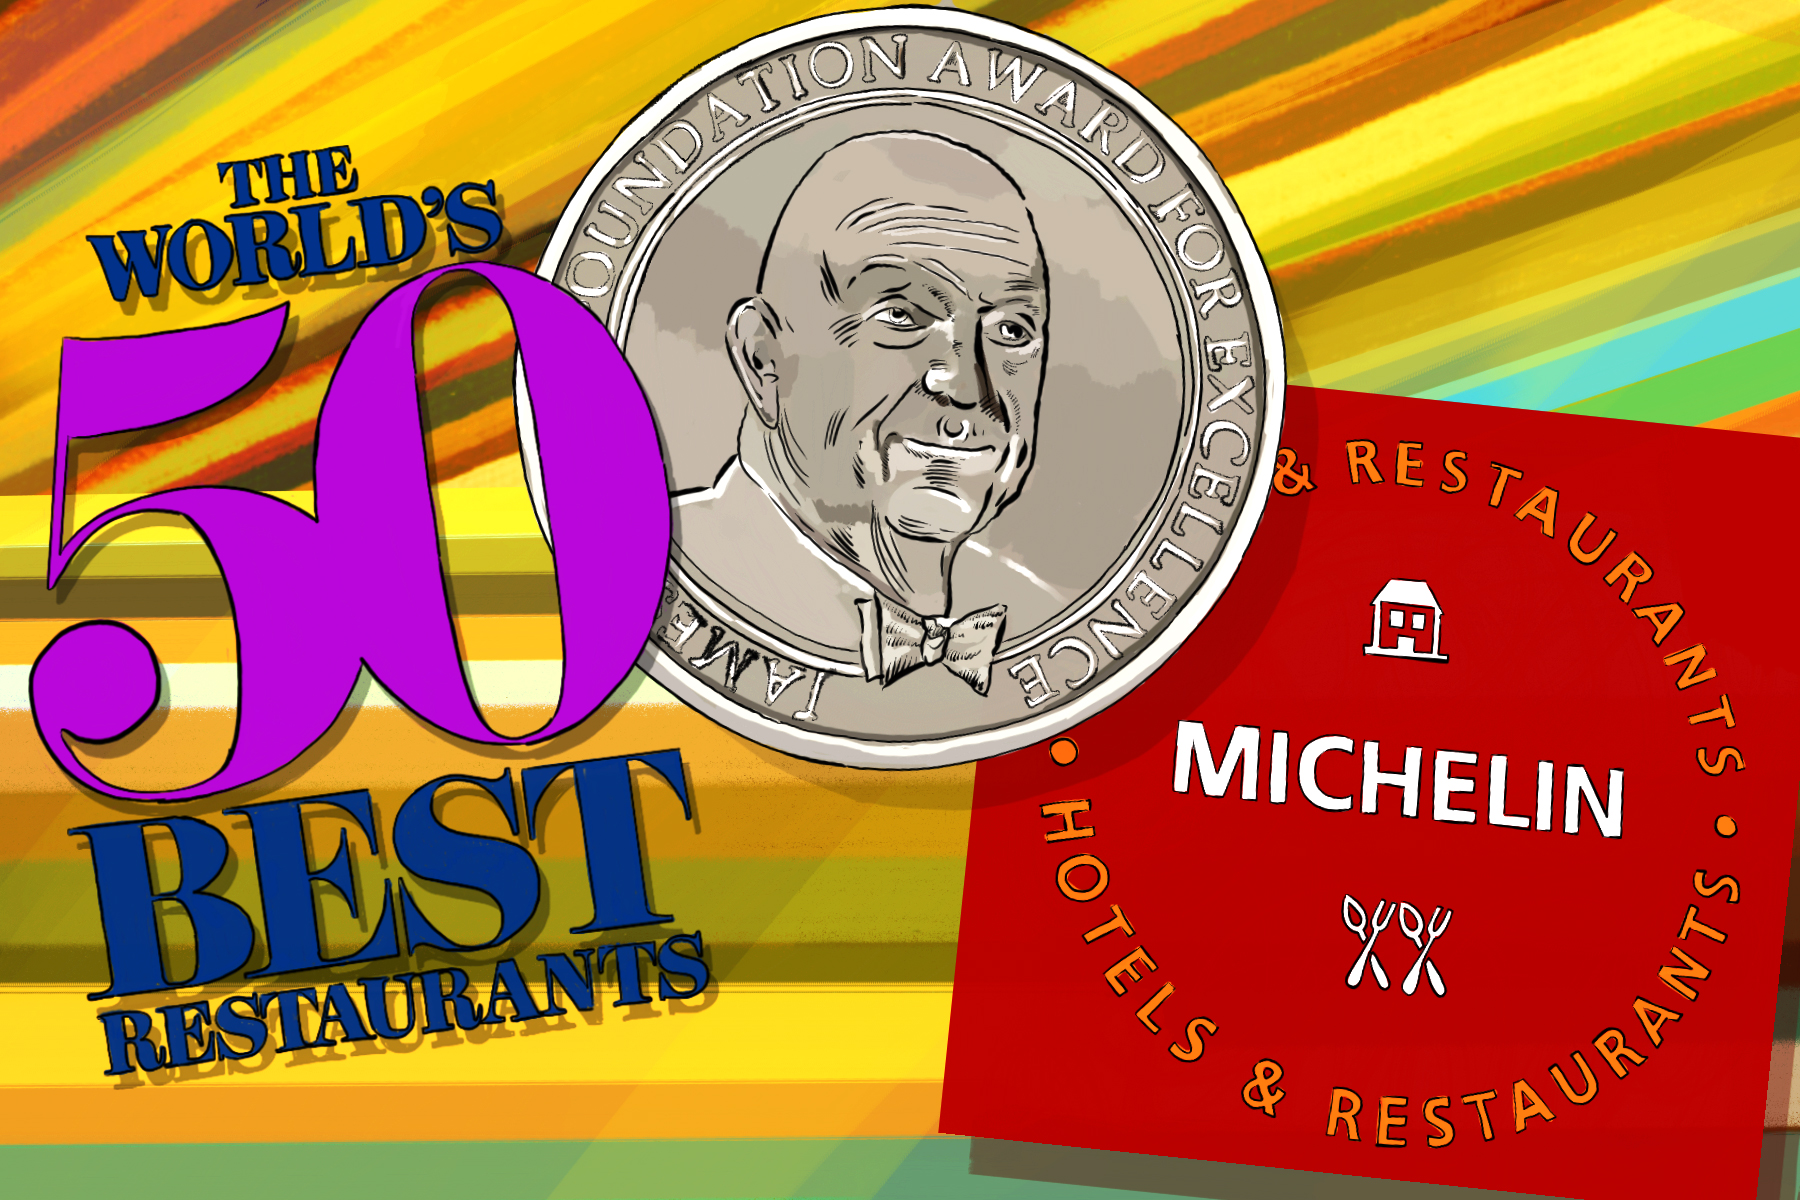 An illustration with the World’s 50 Best Logo, Michelin logo, and a James Beard Award medal